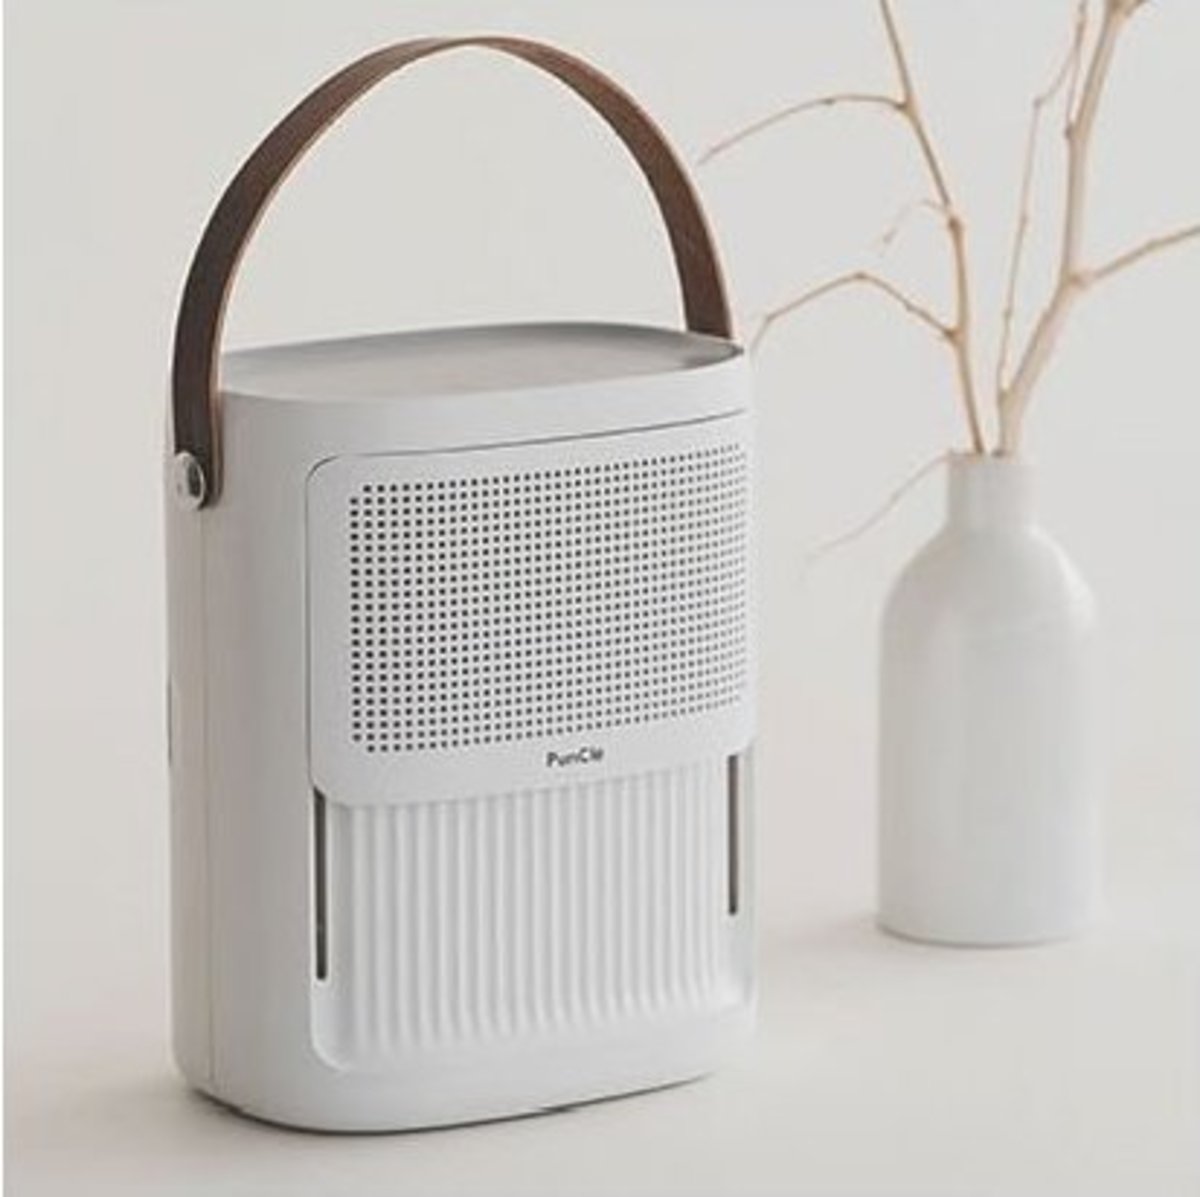 ATECH - South Korea Puricle A1 Portable Air Purifier [Licensed in Hong Kong]